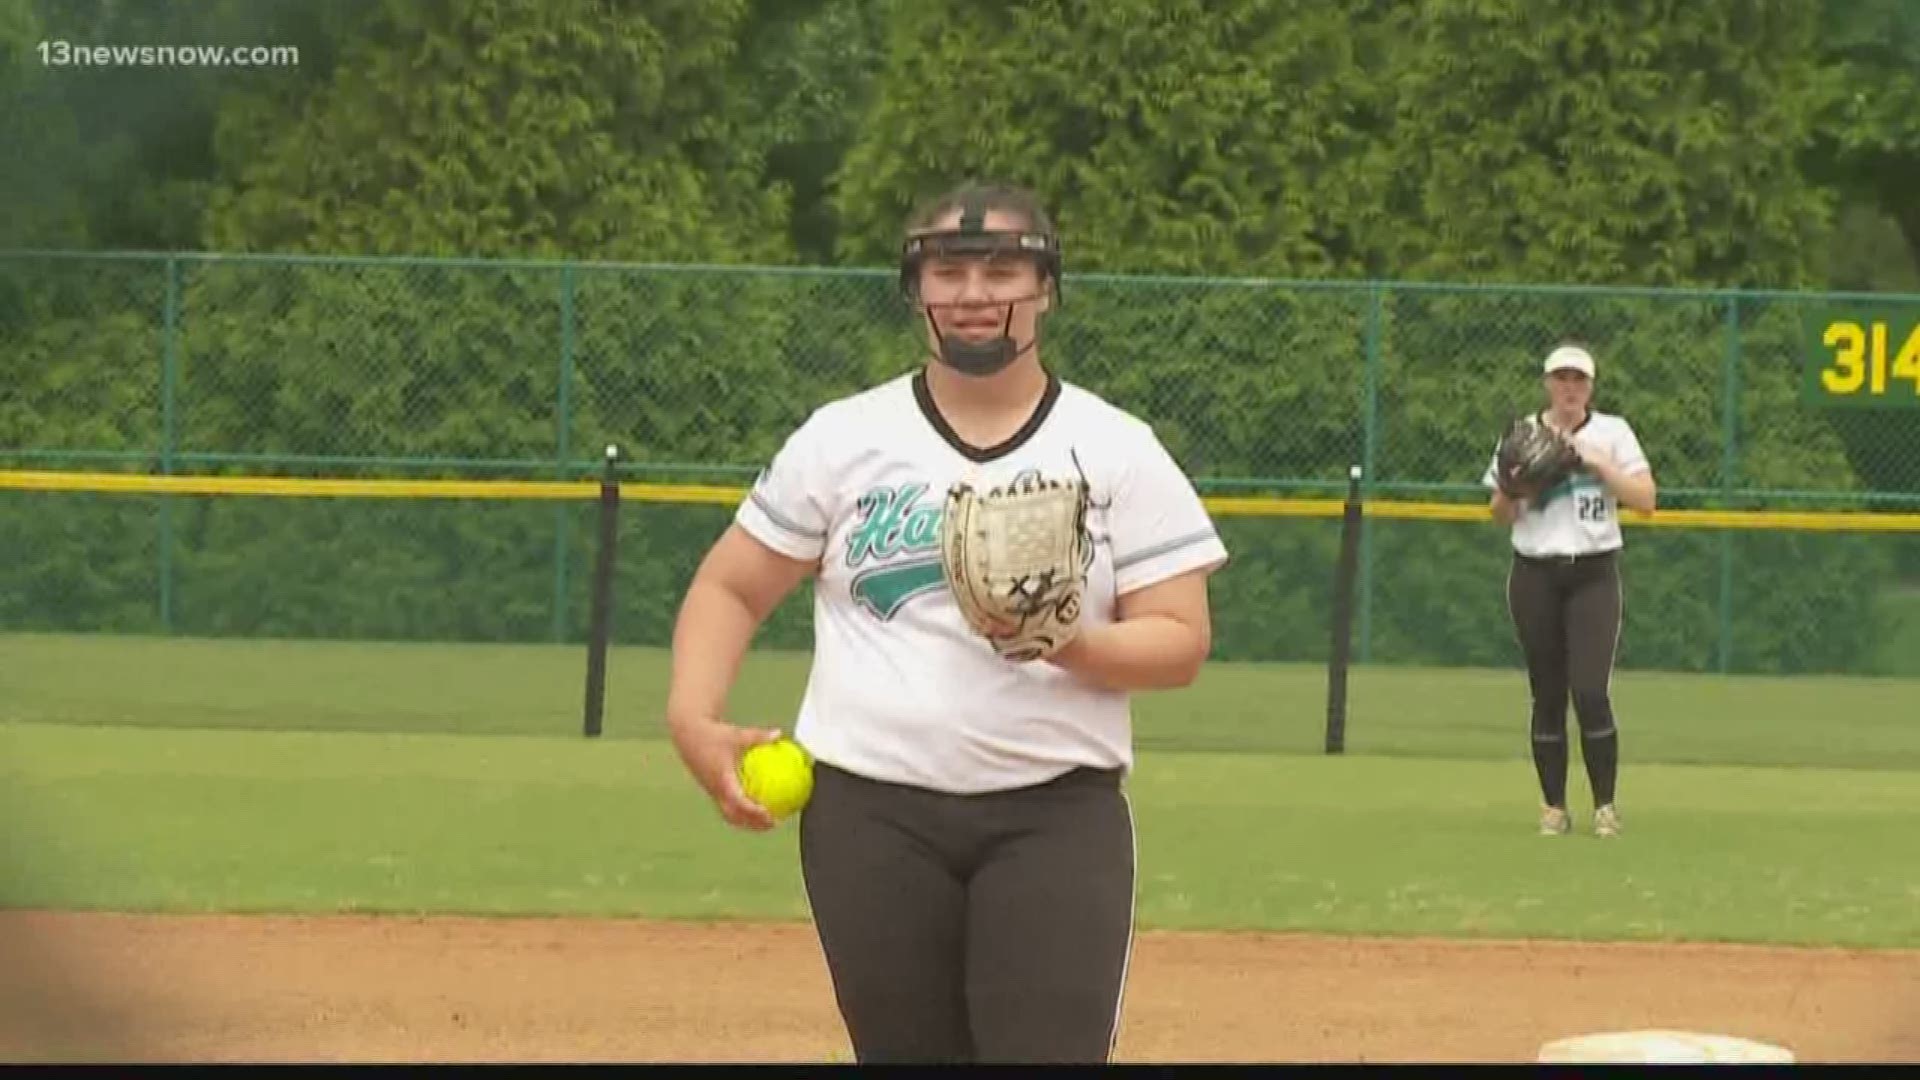 We have highlights of baseball wins for Menchville and Hickory. Plus, for good measure, we give you Hickory softball as well.